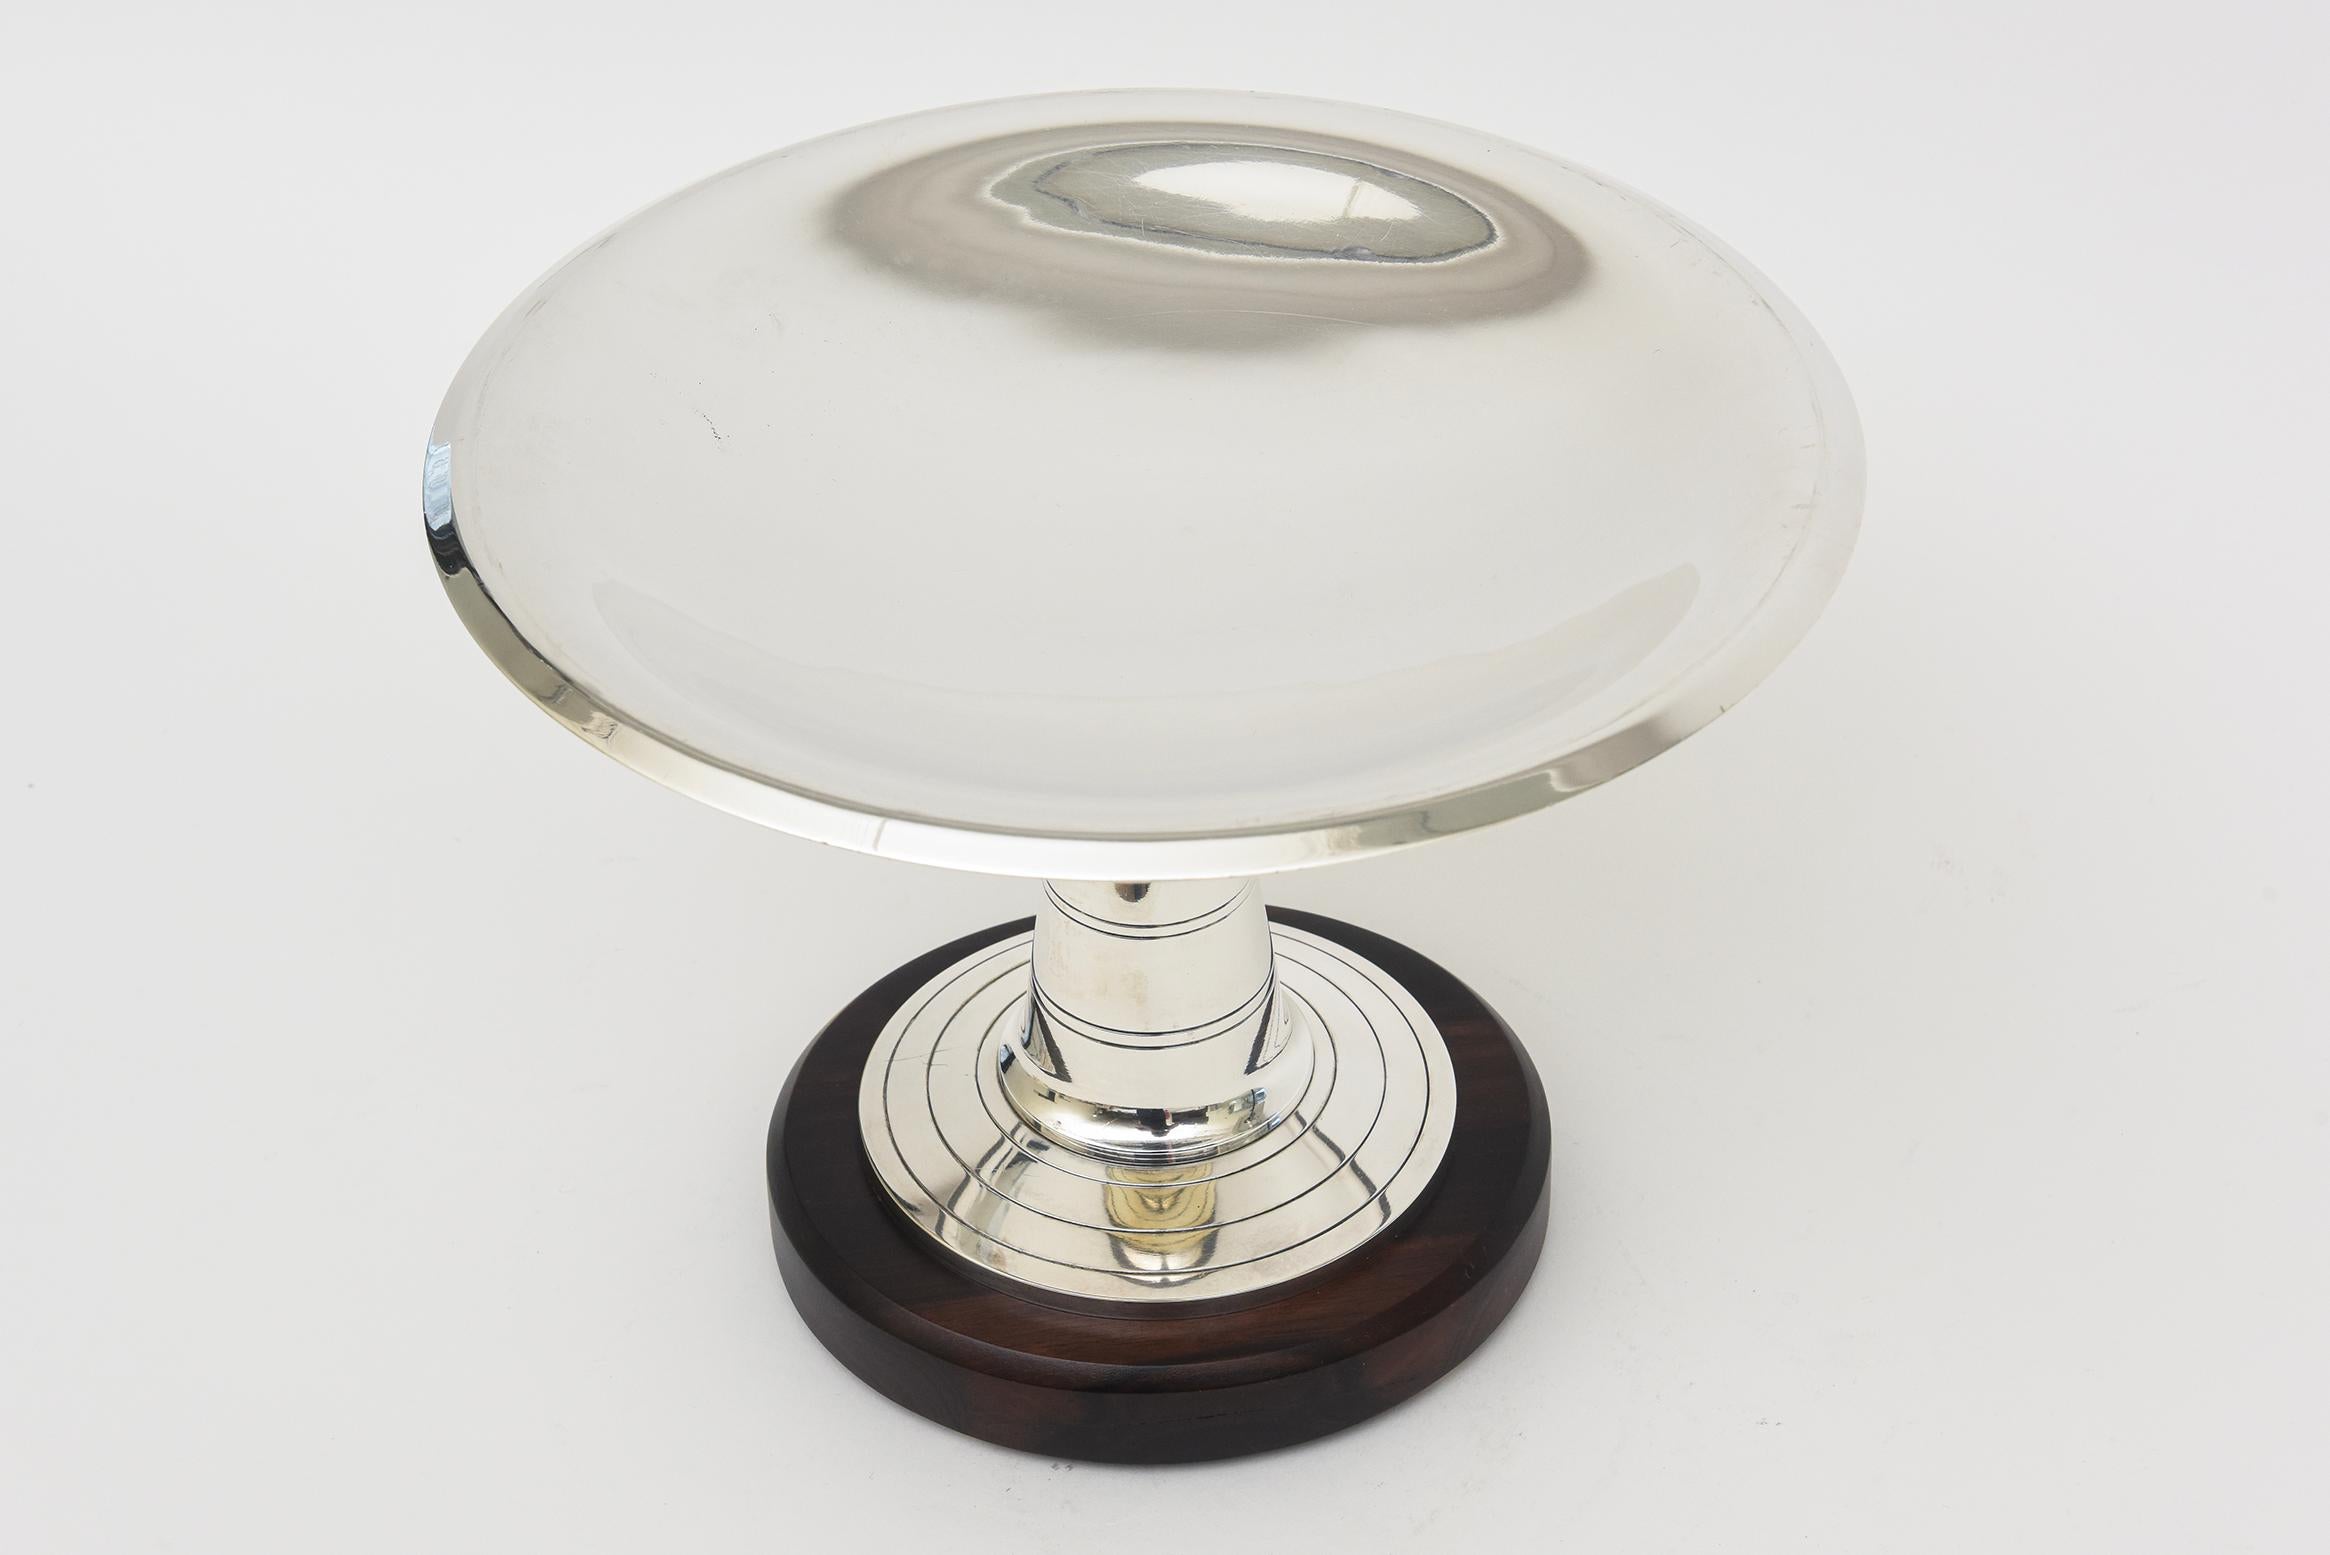 Mid-20th Century Vintage Art Deco French Silver-Plate and Rosewood Pedestal Bowl Or Serving Piece For Sale